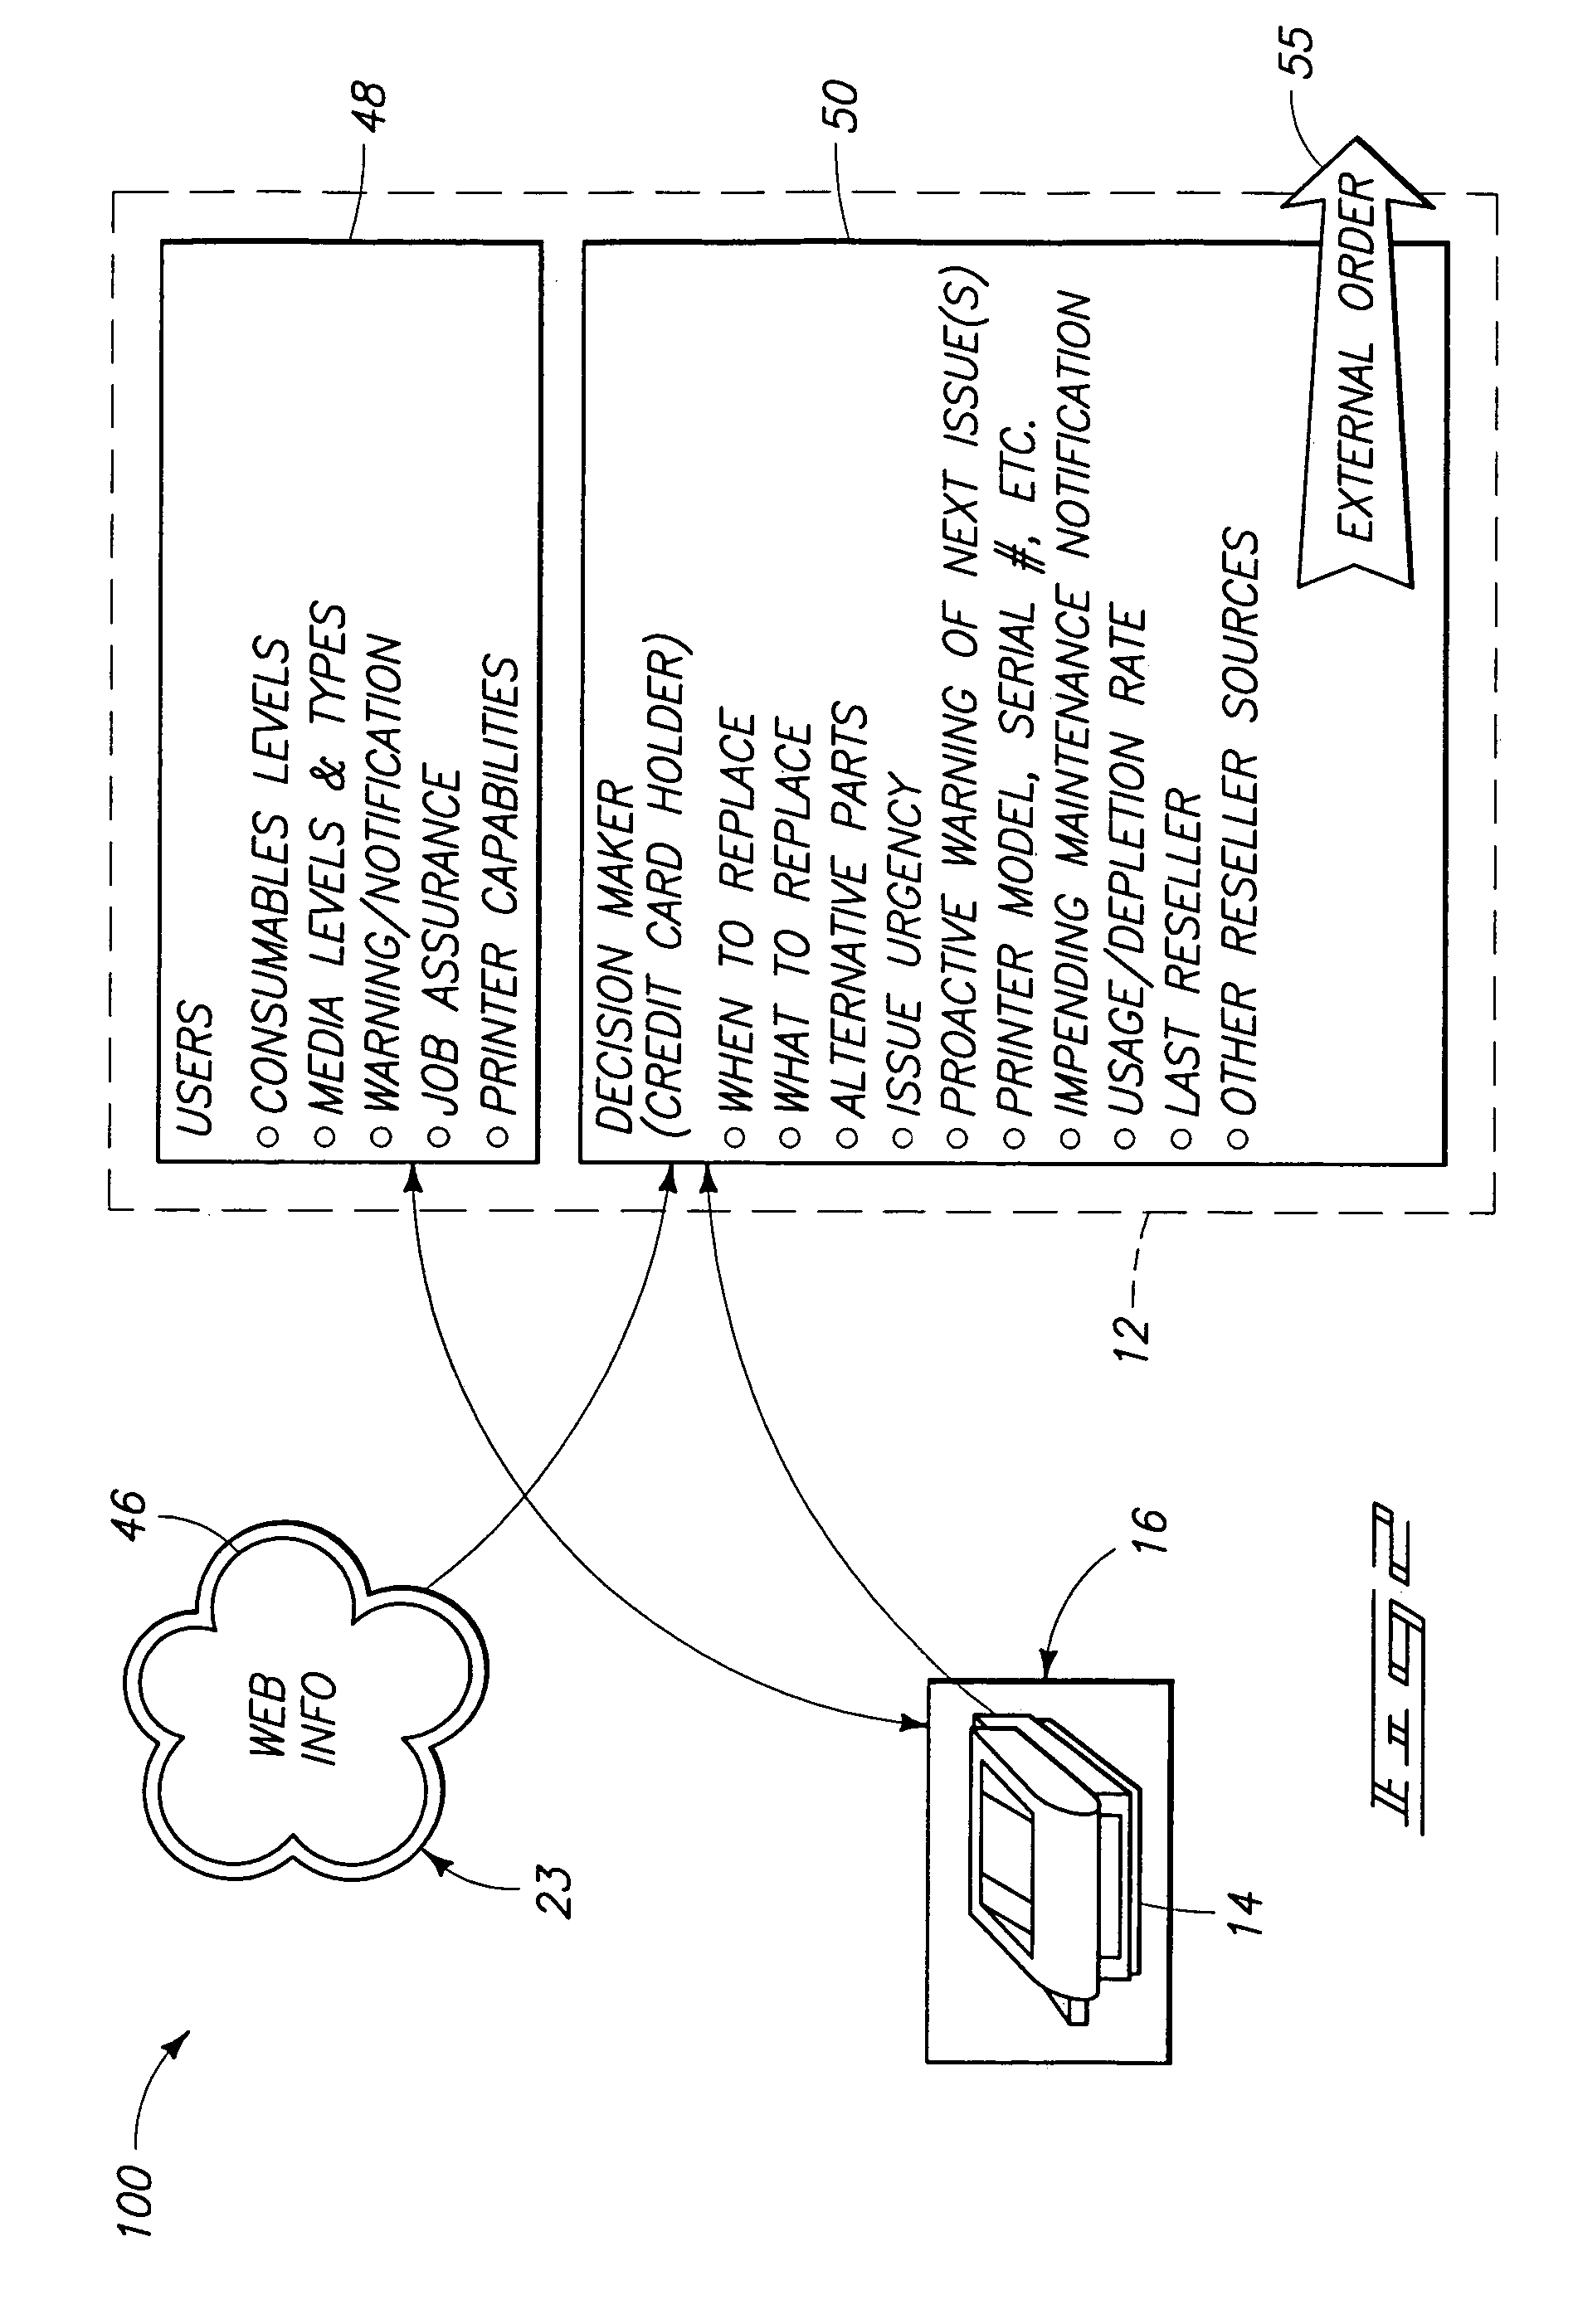 Self-adjusting consumable order-assistance system and method